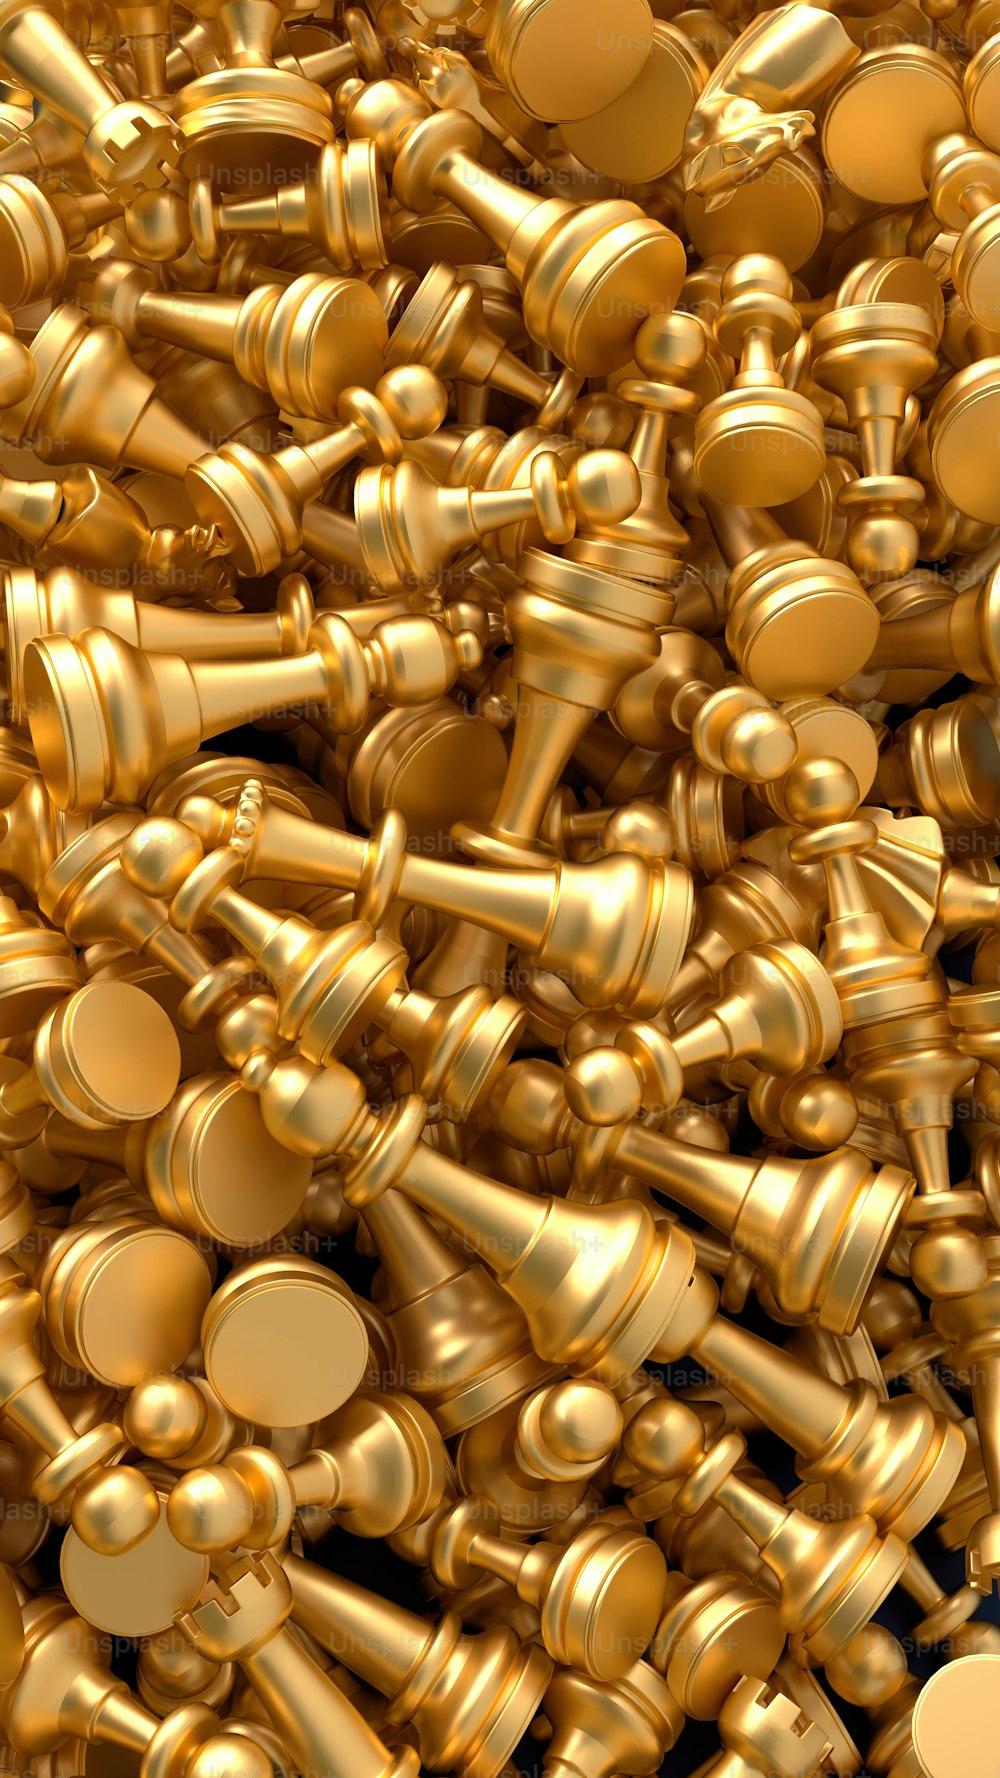 a large pile of gold colored objects